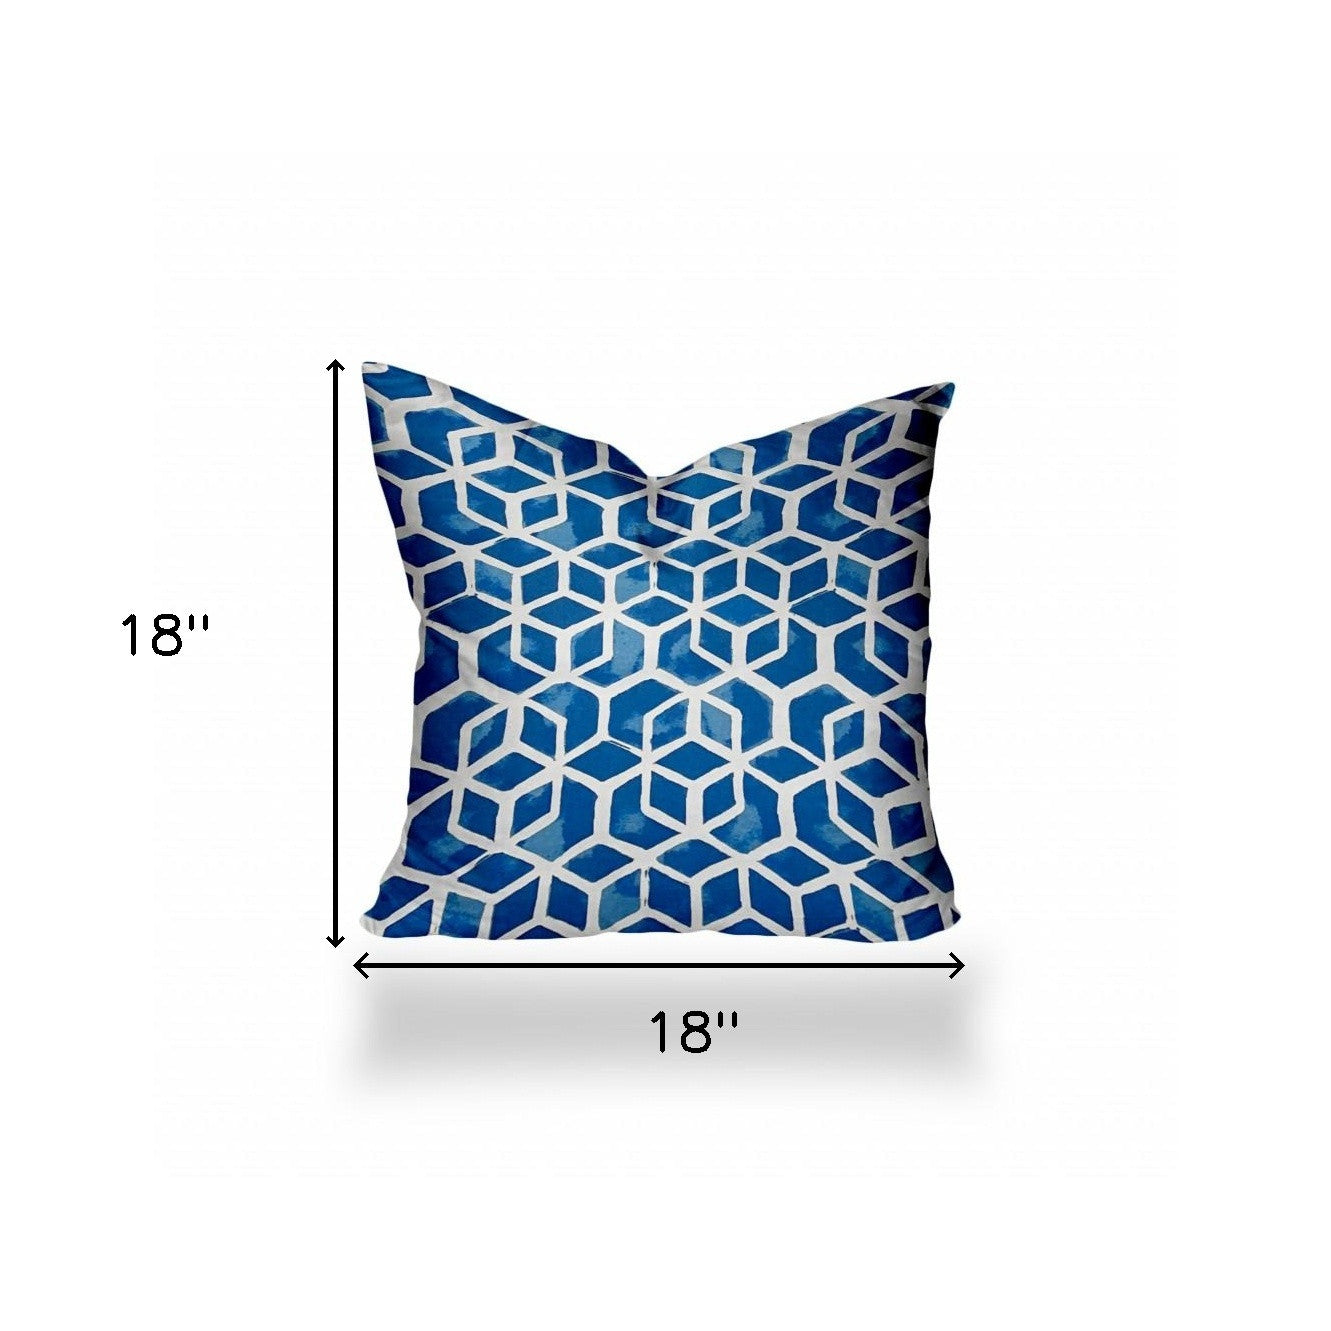 18" X 18" Blue and White Geometric Shapes Indoor Outdoor Throw Pillow Cover